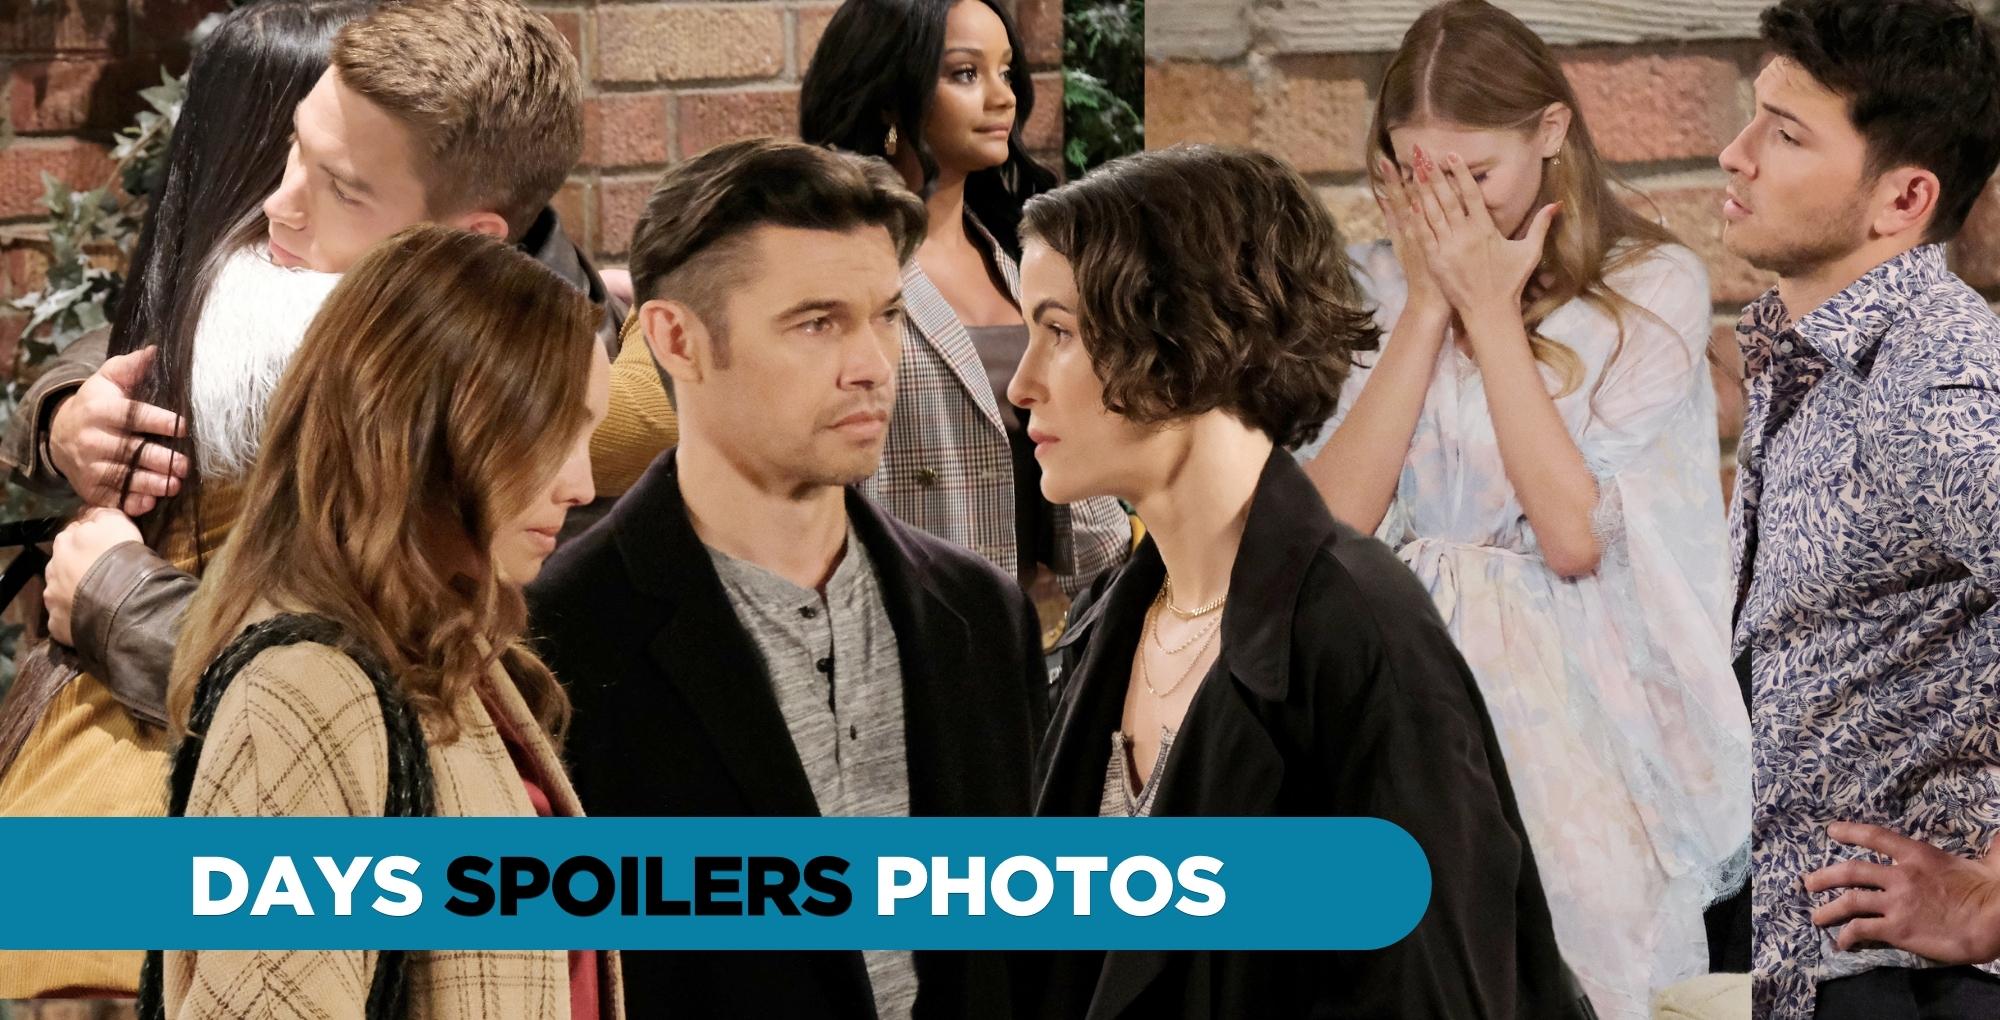 days spoilers photos with tripp, chanel, allie, and alex, xander, gwen, and sarah